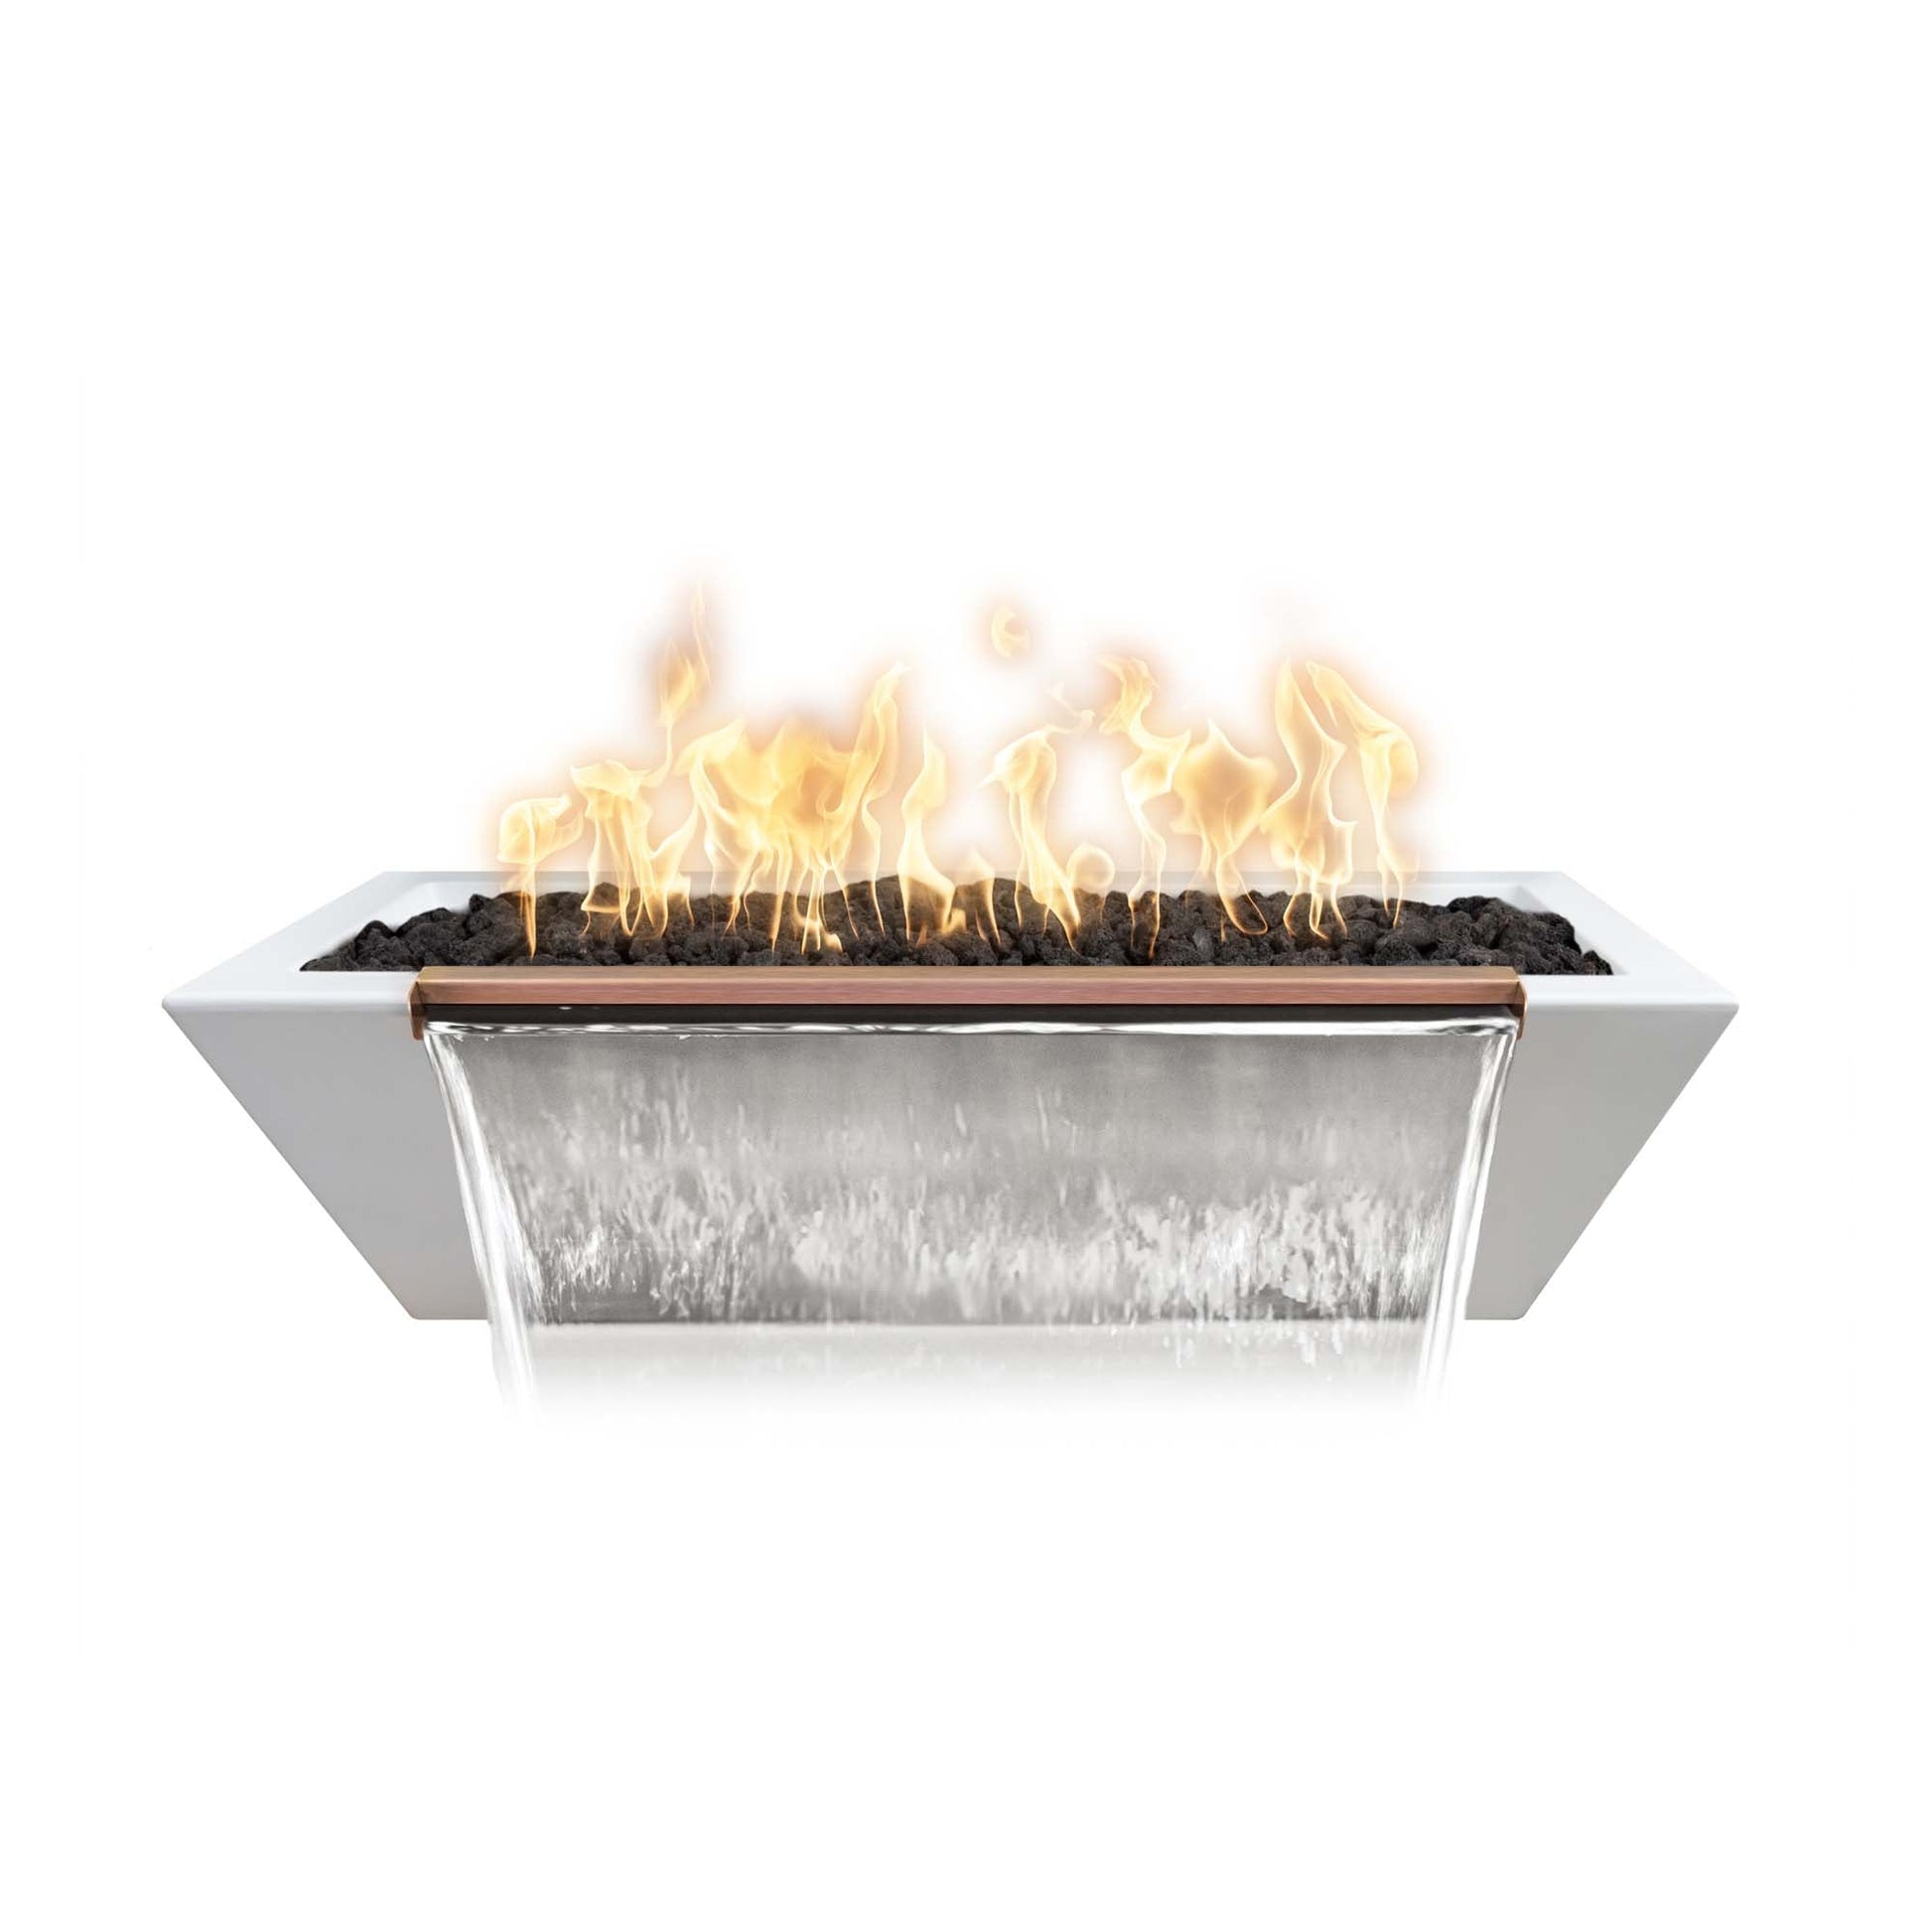 The Outdoor Plus Linear Maya 48" Natural Gray GFRC Concrete Natural Gas Fire & Water Bowl with Match Lit with Flame Sense Ignition